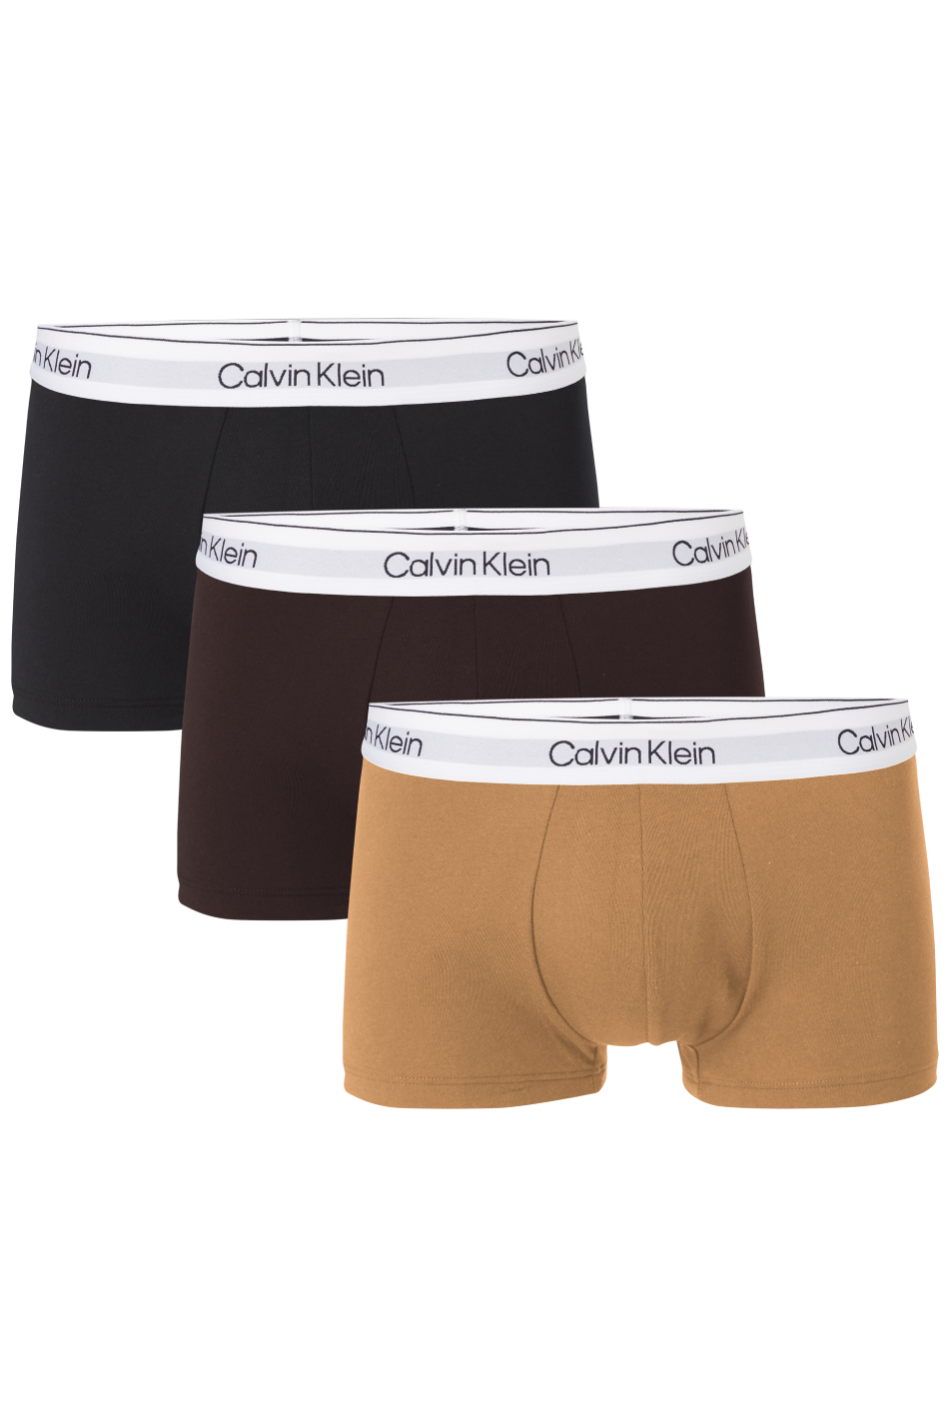 Calvin Klein 3 Pack Men's Recycled Cotton Stretch Low Rise Trunk